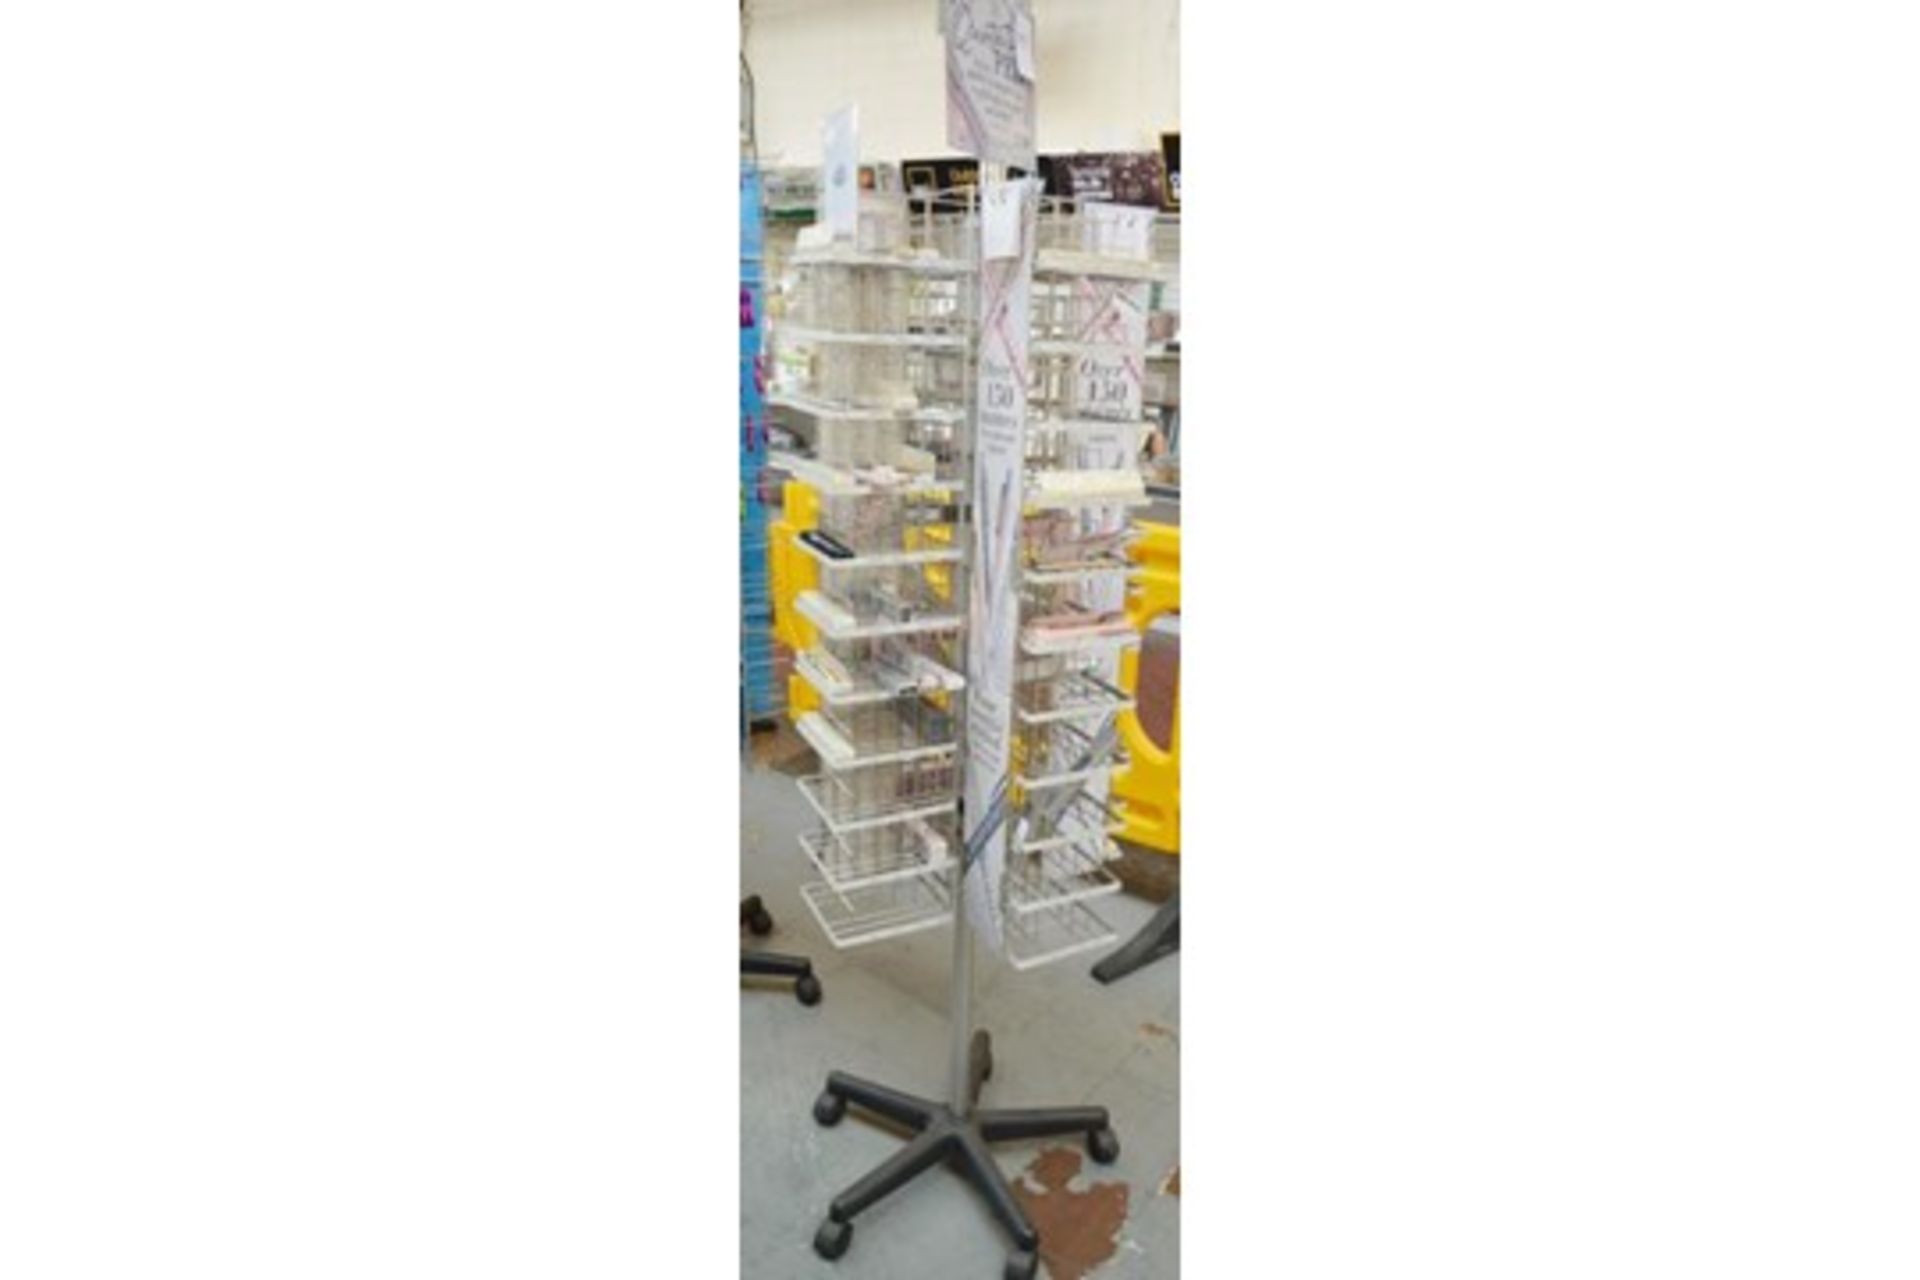 27 x Retail Carousel Display Stands With Approximately 2,800 Items of Resale Stock - Includes - Image 54 of 61